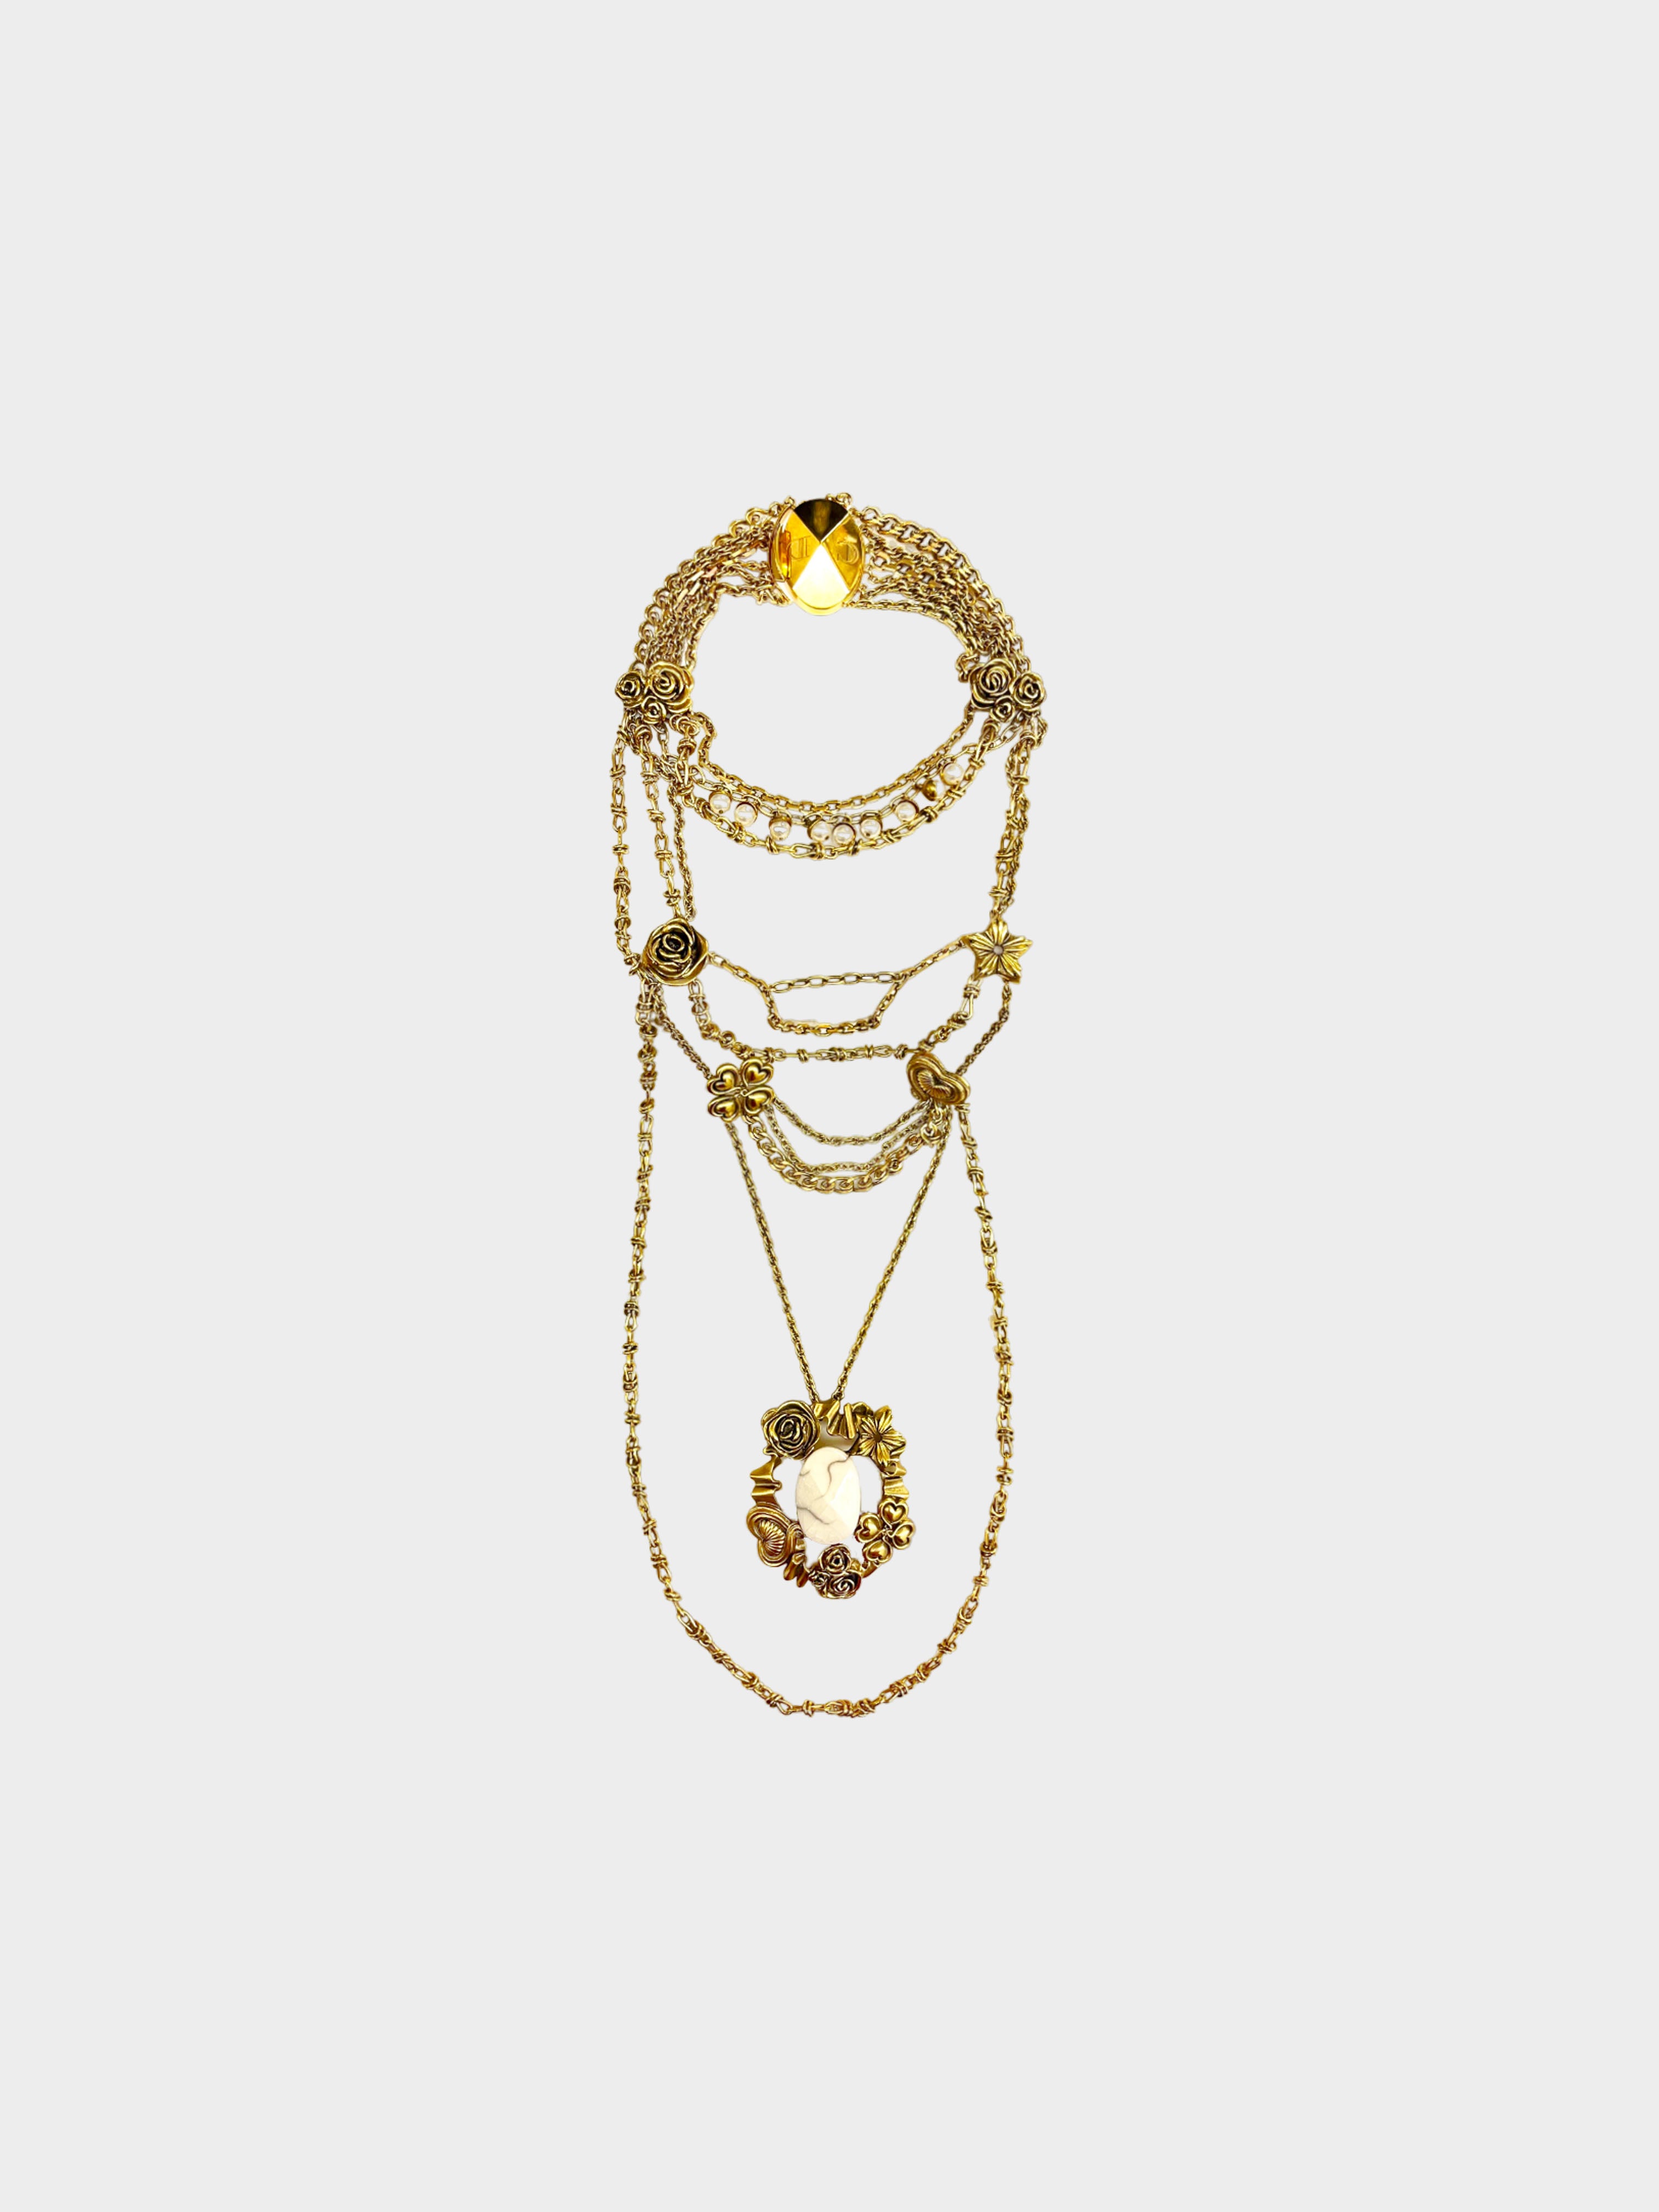 Christian Dior by John Galliano 2000s Gold Charmed Multi Necklace